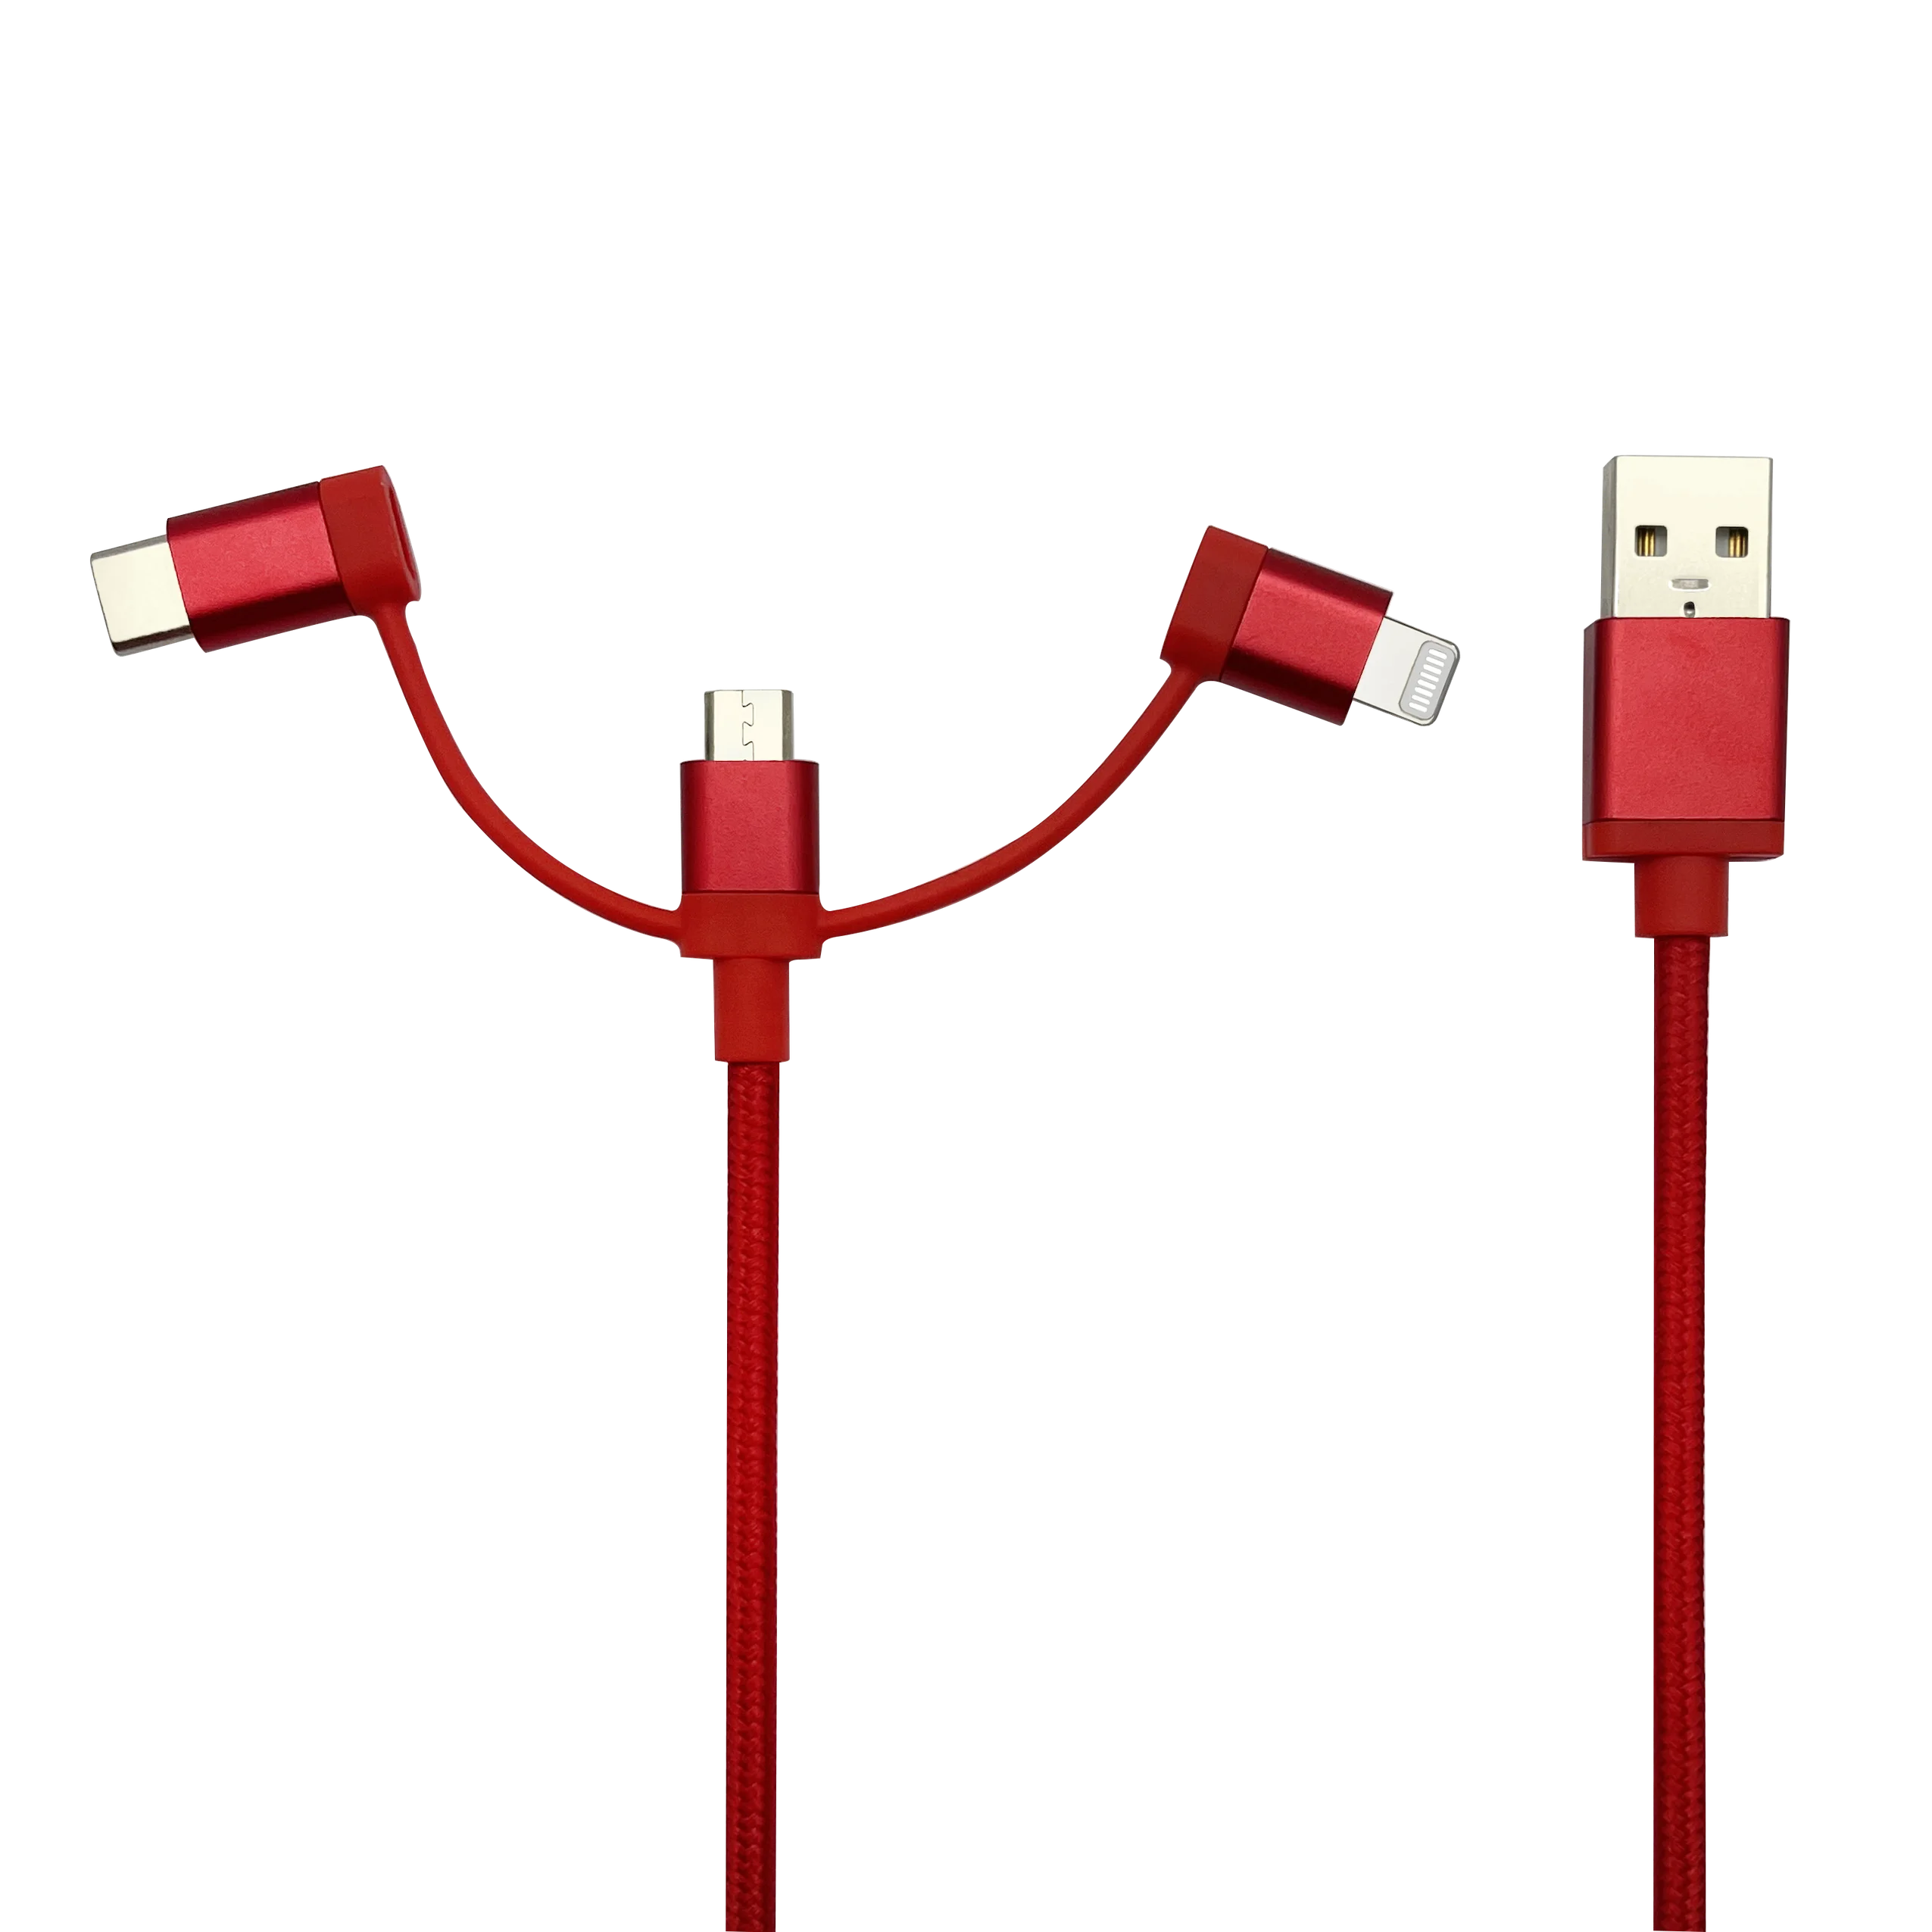 Hot Seller 3 In 1 Mobile Phone Charging Cable Usb-a To Micro B/ Lightning And Usb-c/type C/ Red/ 1m Black Friday Deal - Buy Hot Seller 3-in-1 Mobile Charging Cable Usb-a